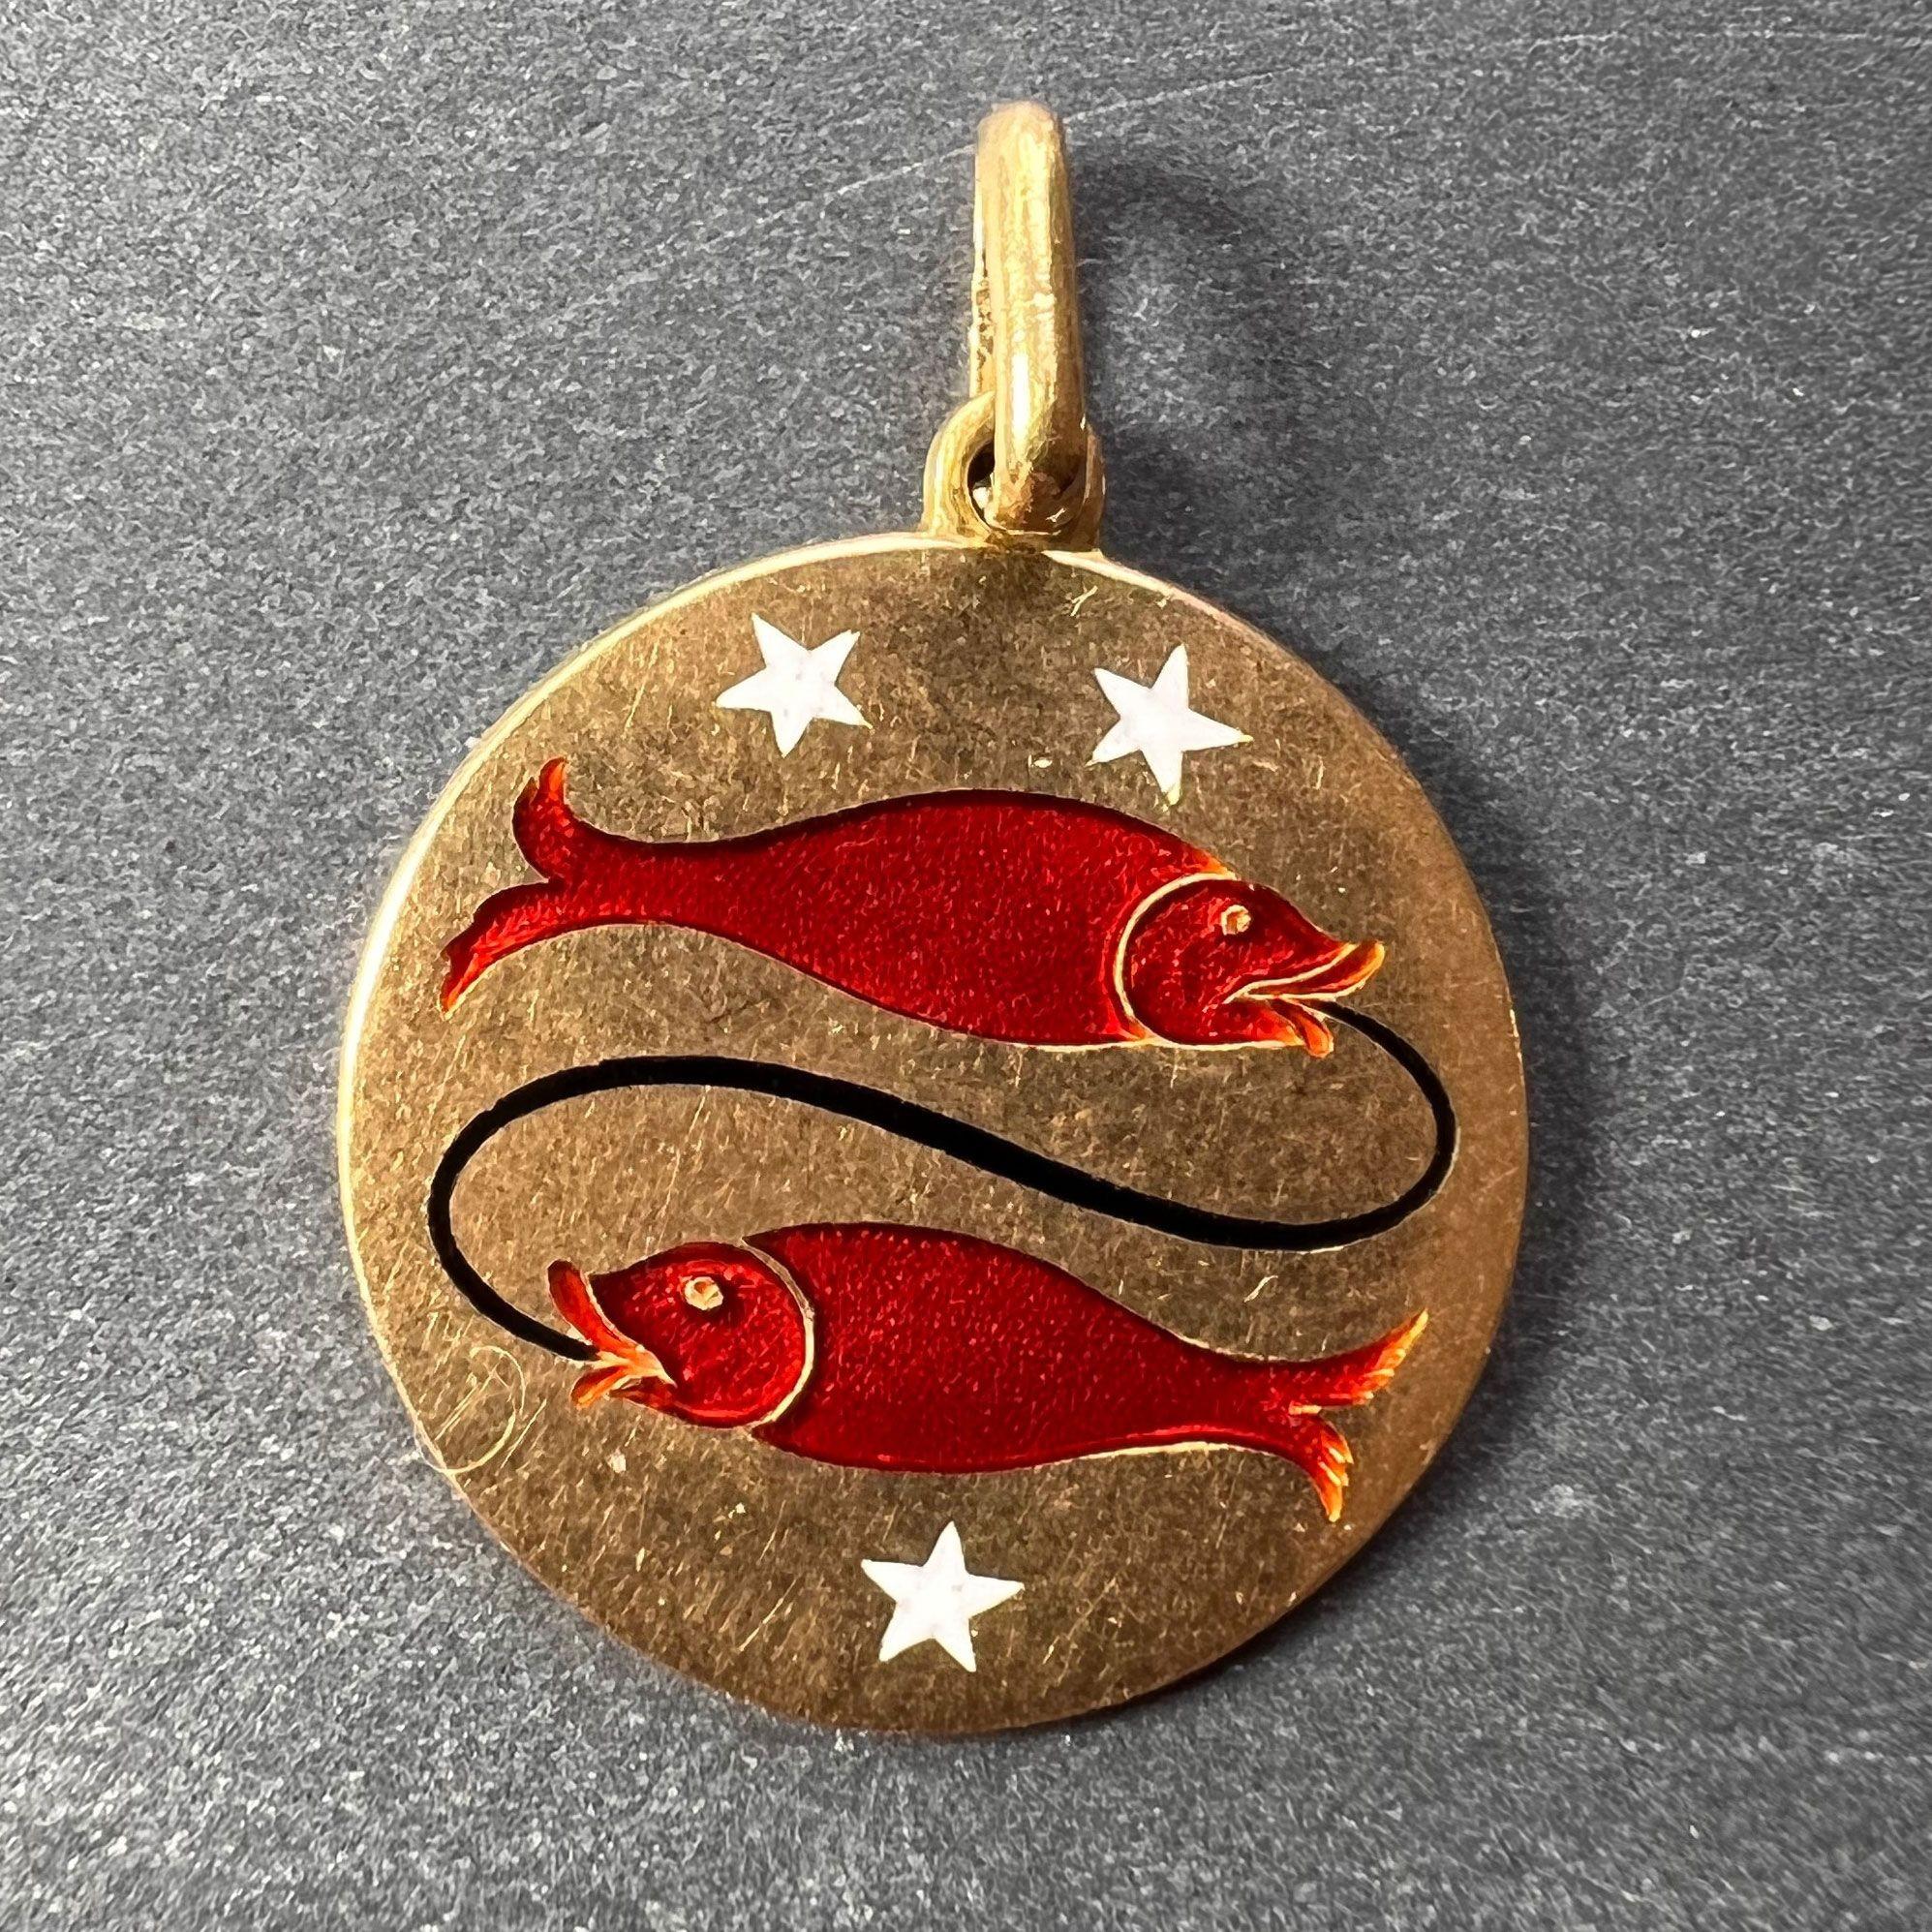 An 18 karat (18K) yellow gold charm pendant designed as the zodiac sign of Pisces depicting two fish and three stars in enamel. Stamped 750 for 18 karat gold and 38MI for Italian manufacture to the reverse.

Dimensions: 2.2 x 1.9 x 0.1 cm (not